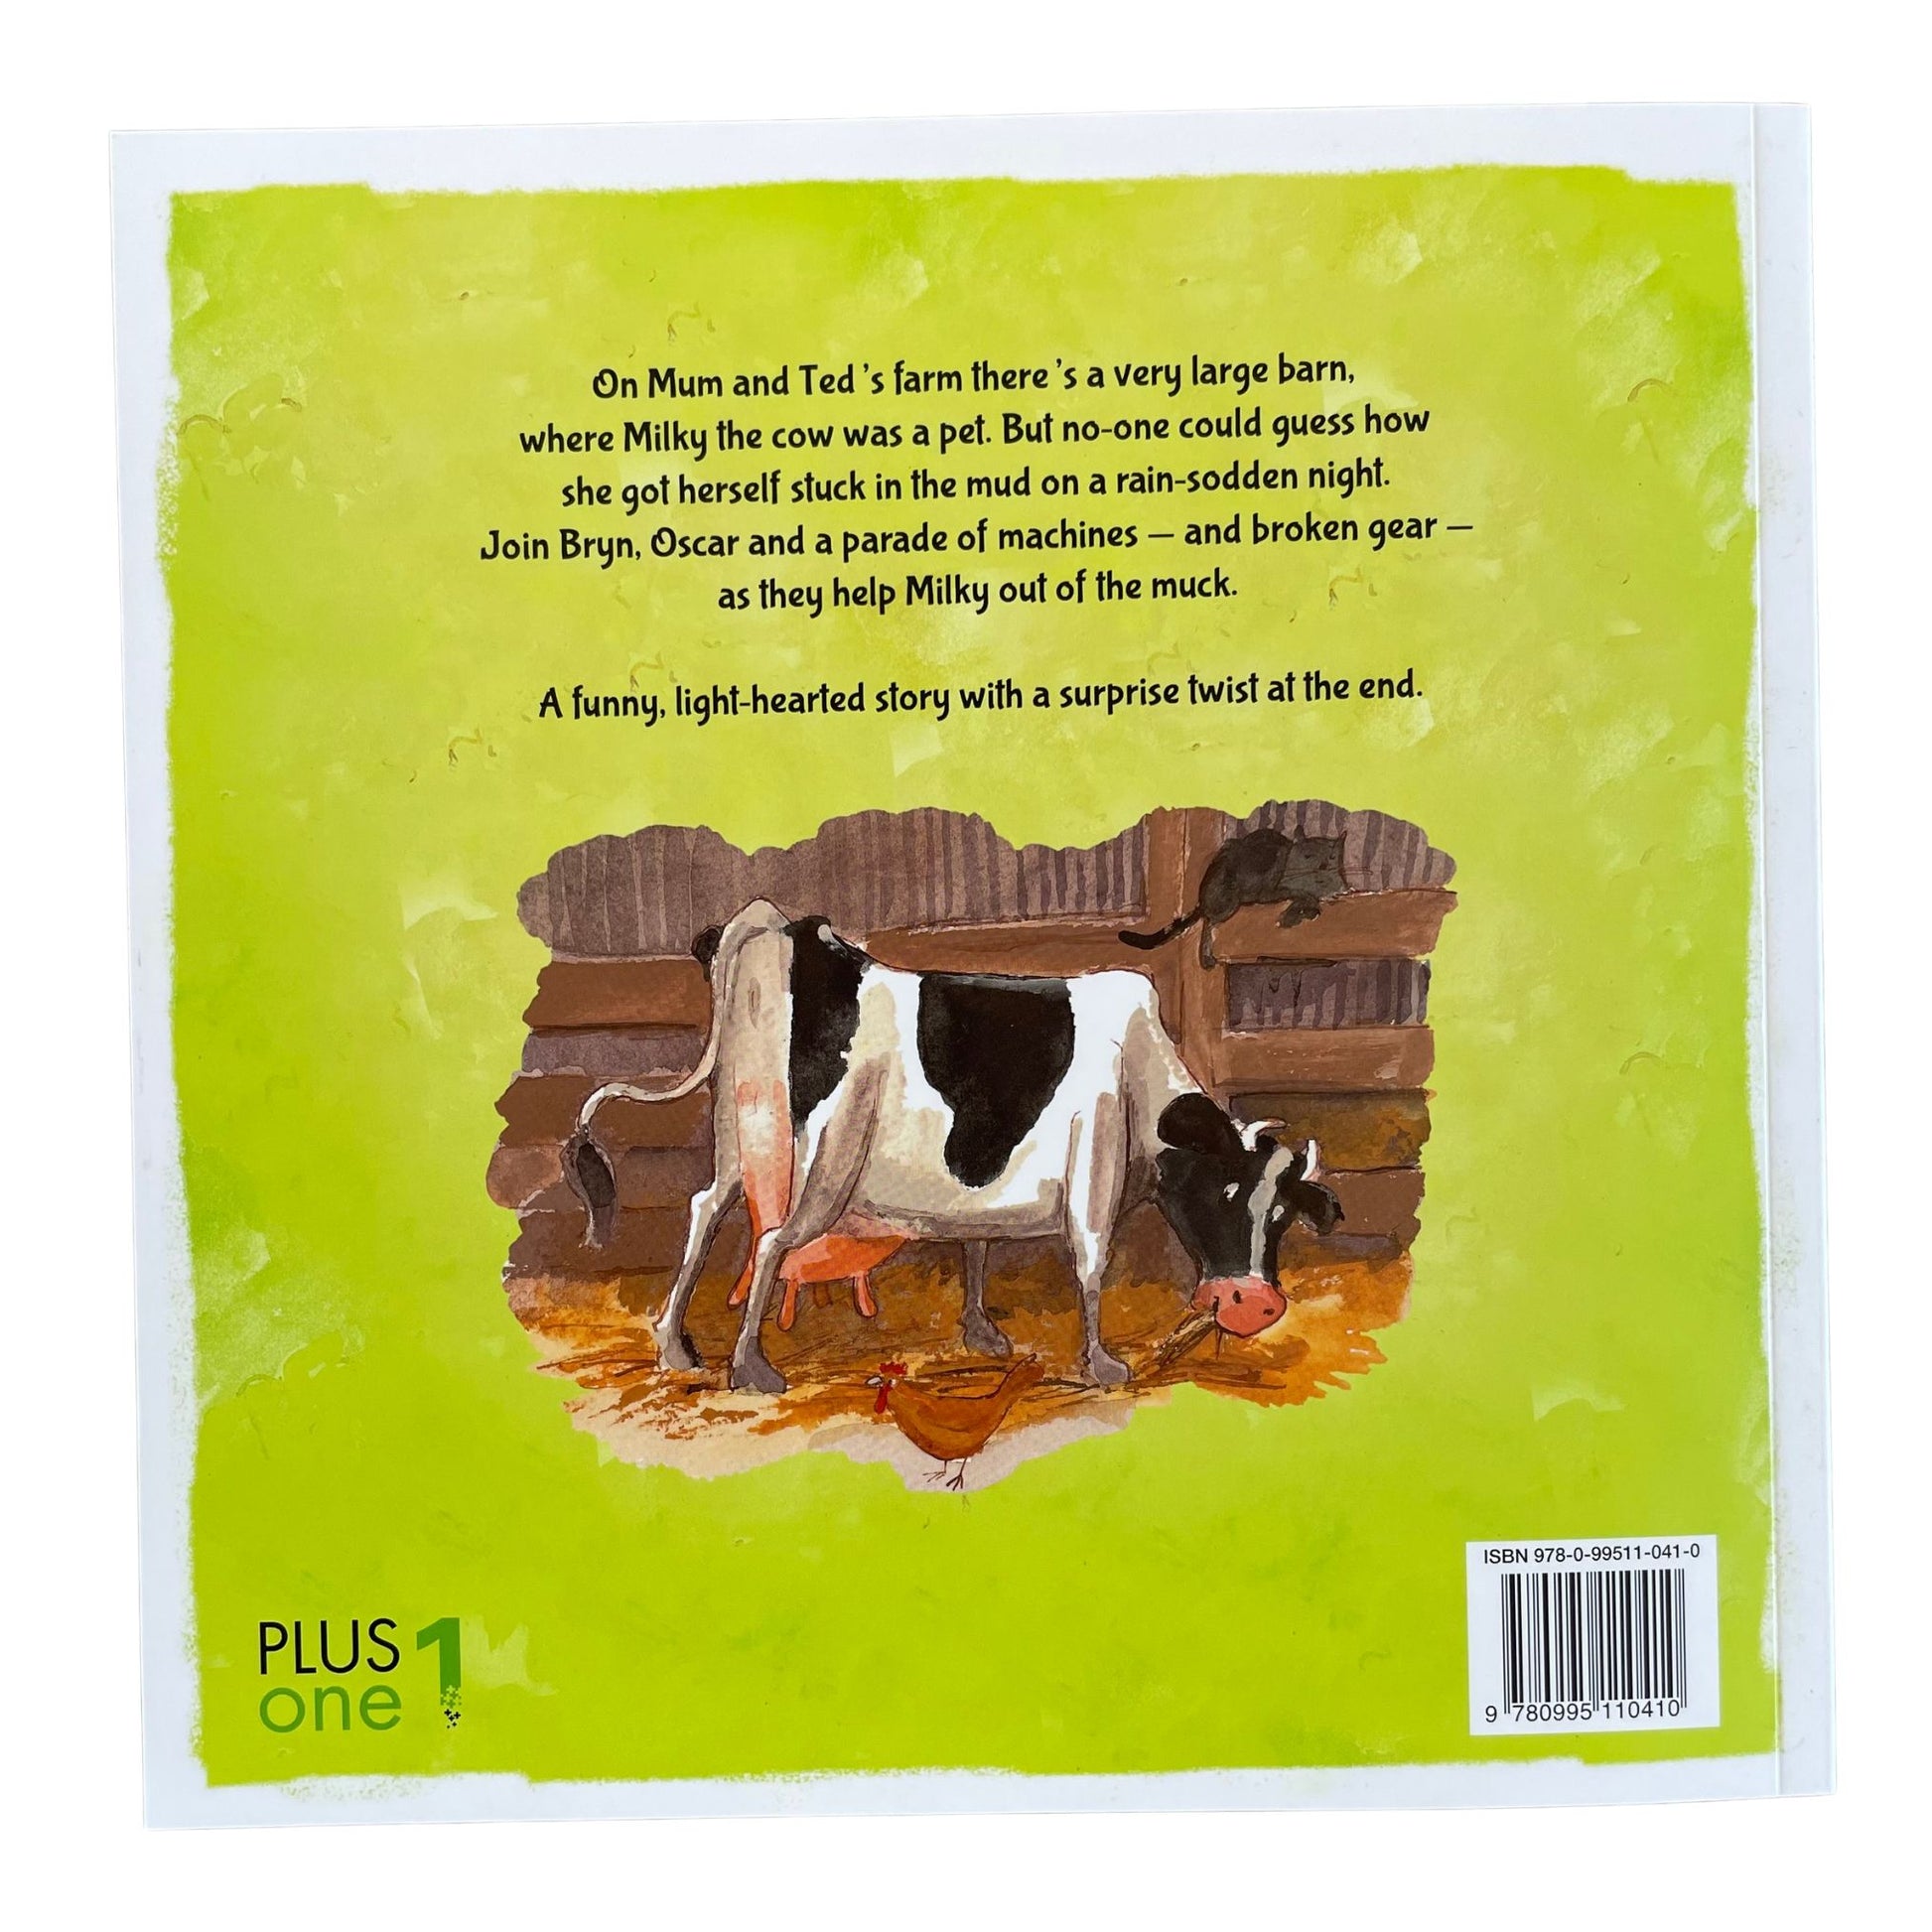 Stuck in the Muck - Soft cover children's story book. Back cover of the book.